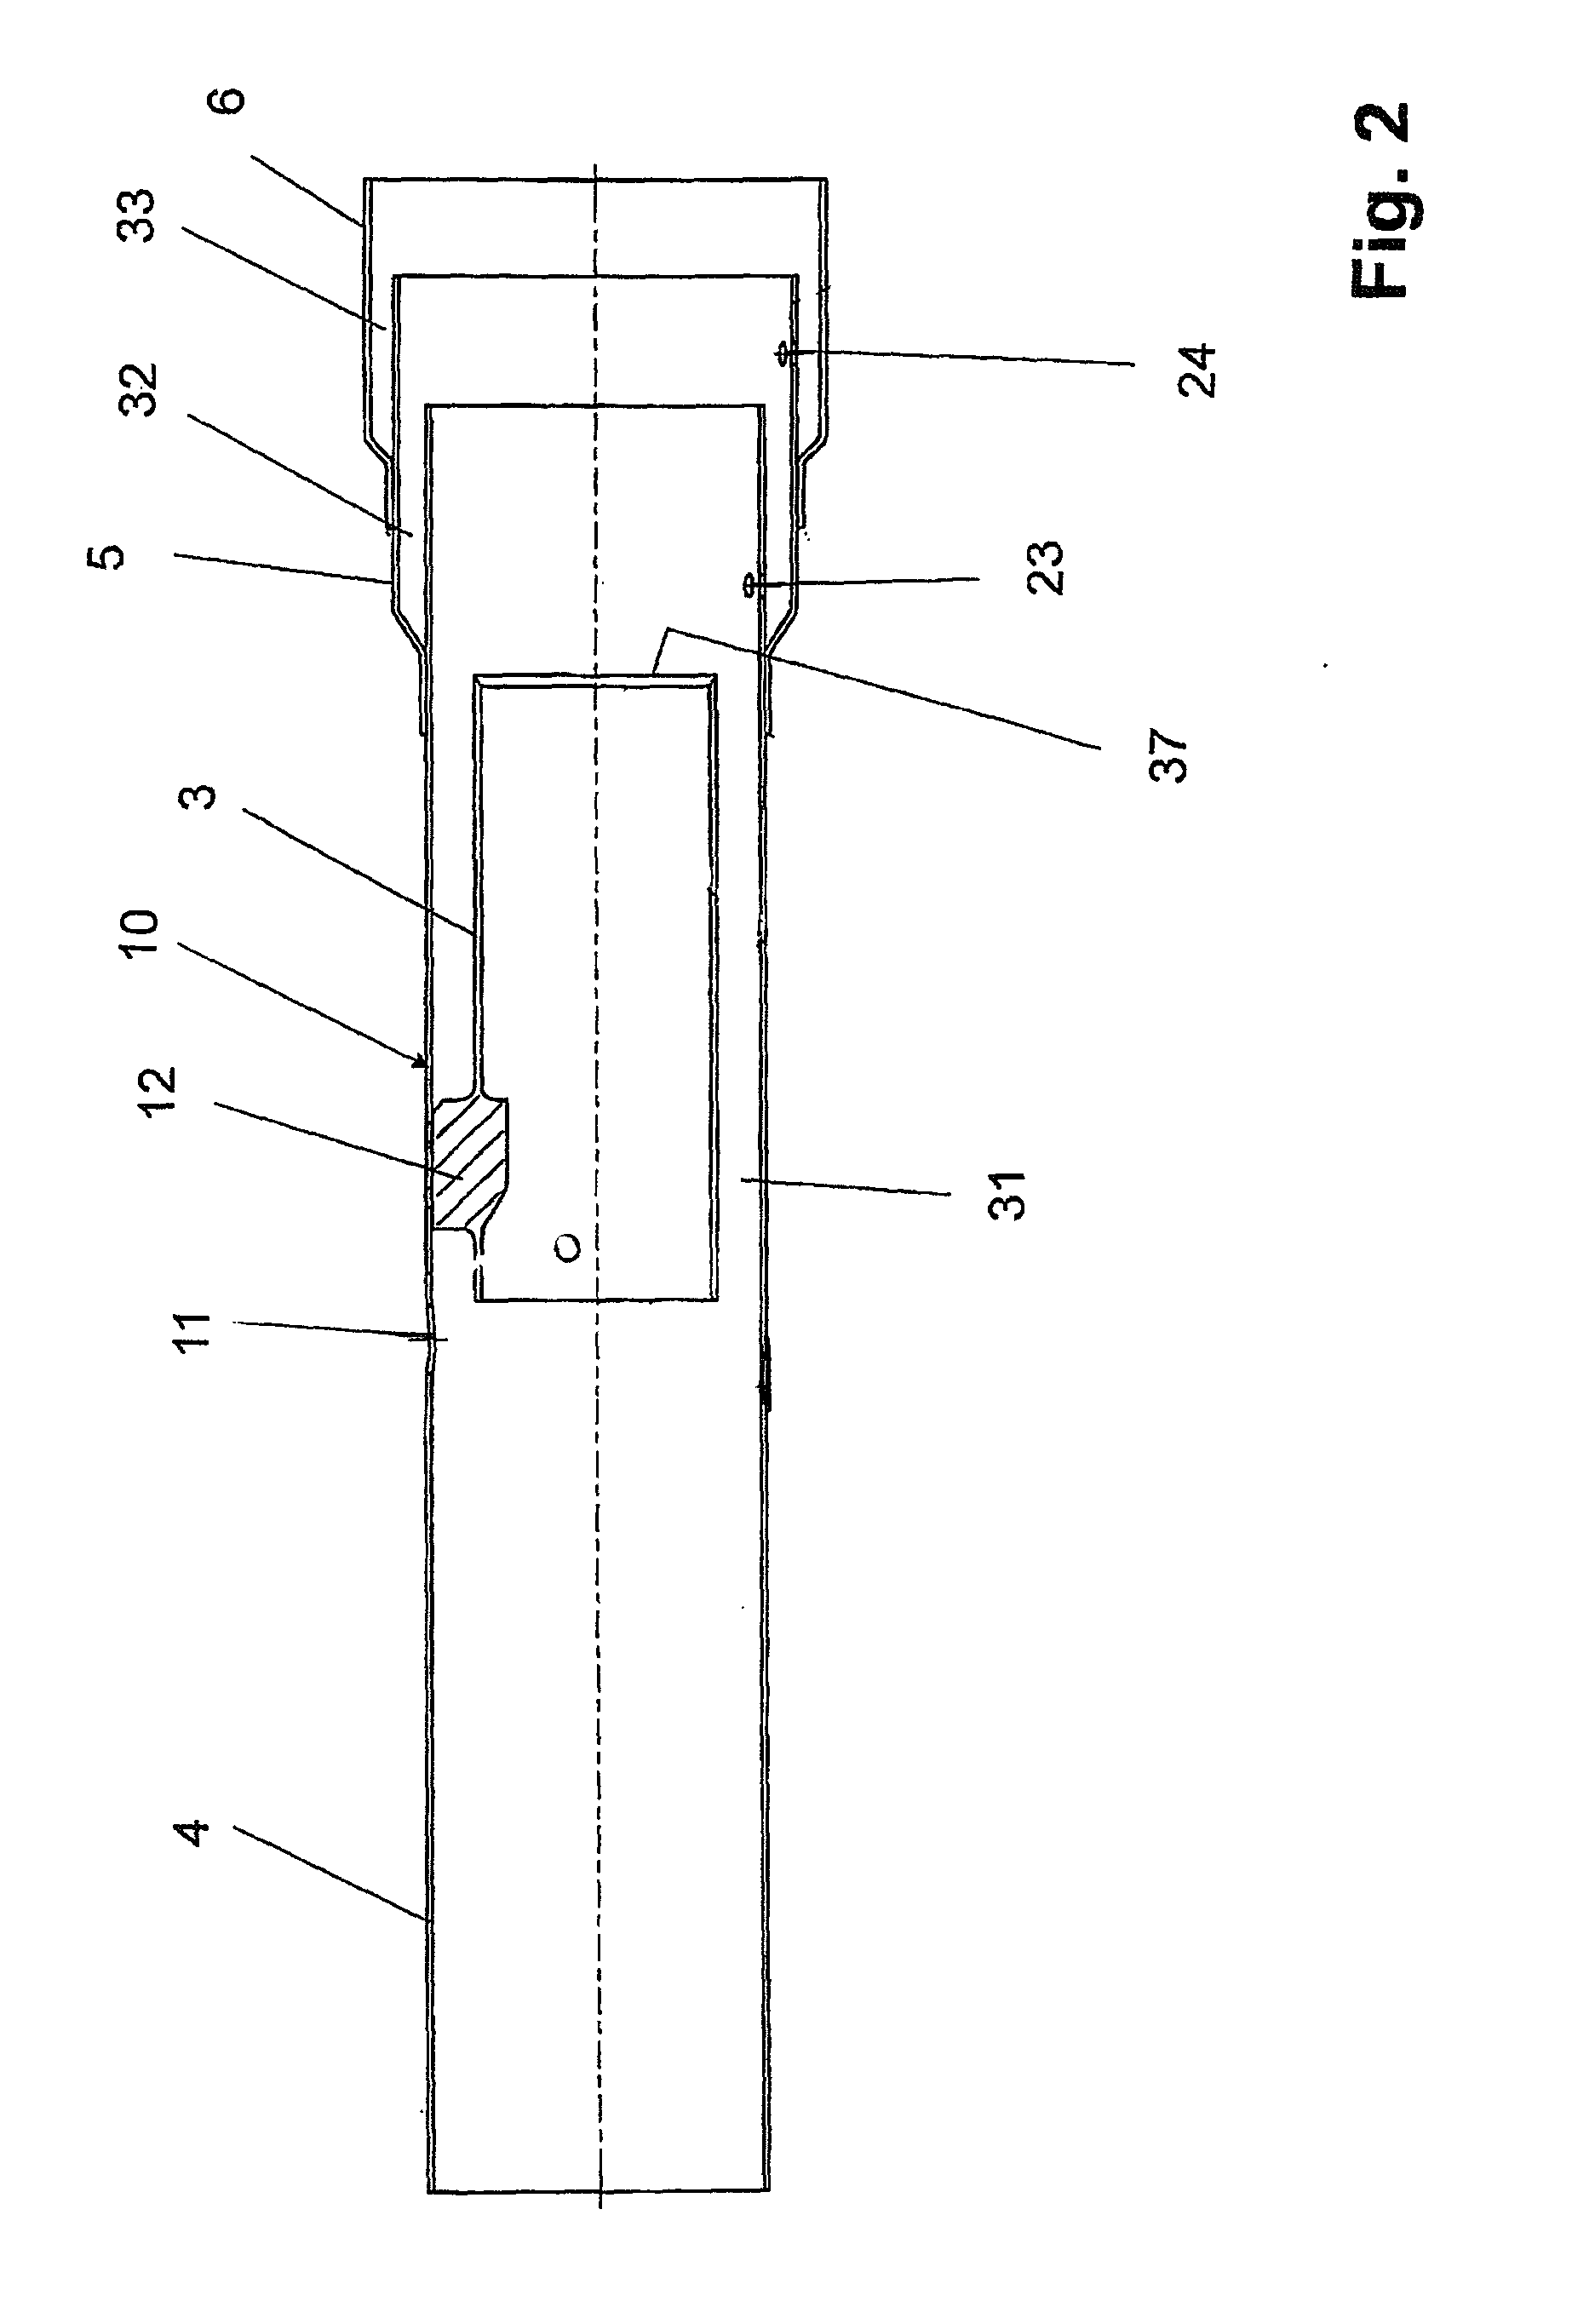 Apparatus for discharging sprays or mists, comprising an oscillating fire burner, and mist pipe for such an apparatus